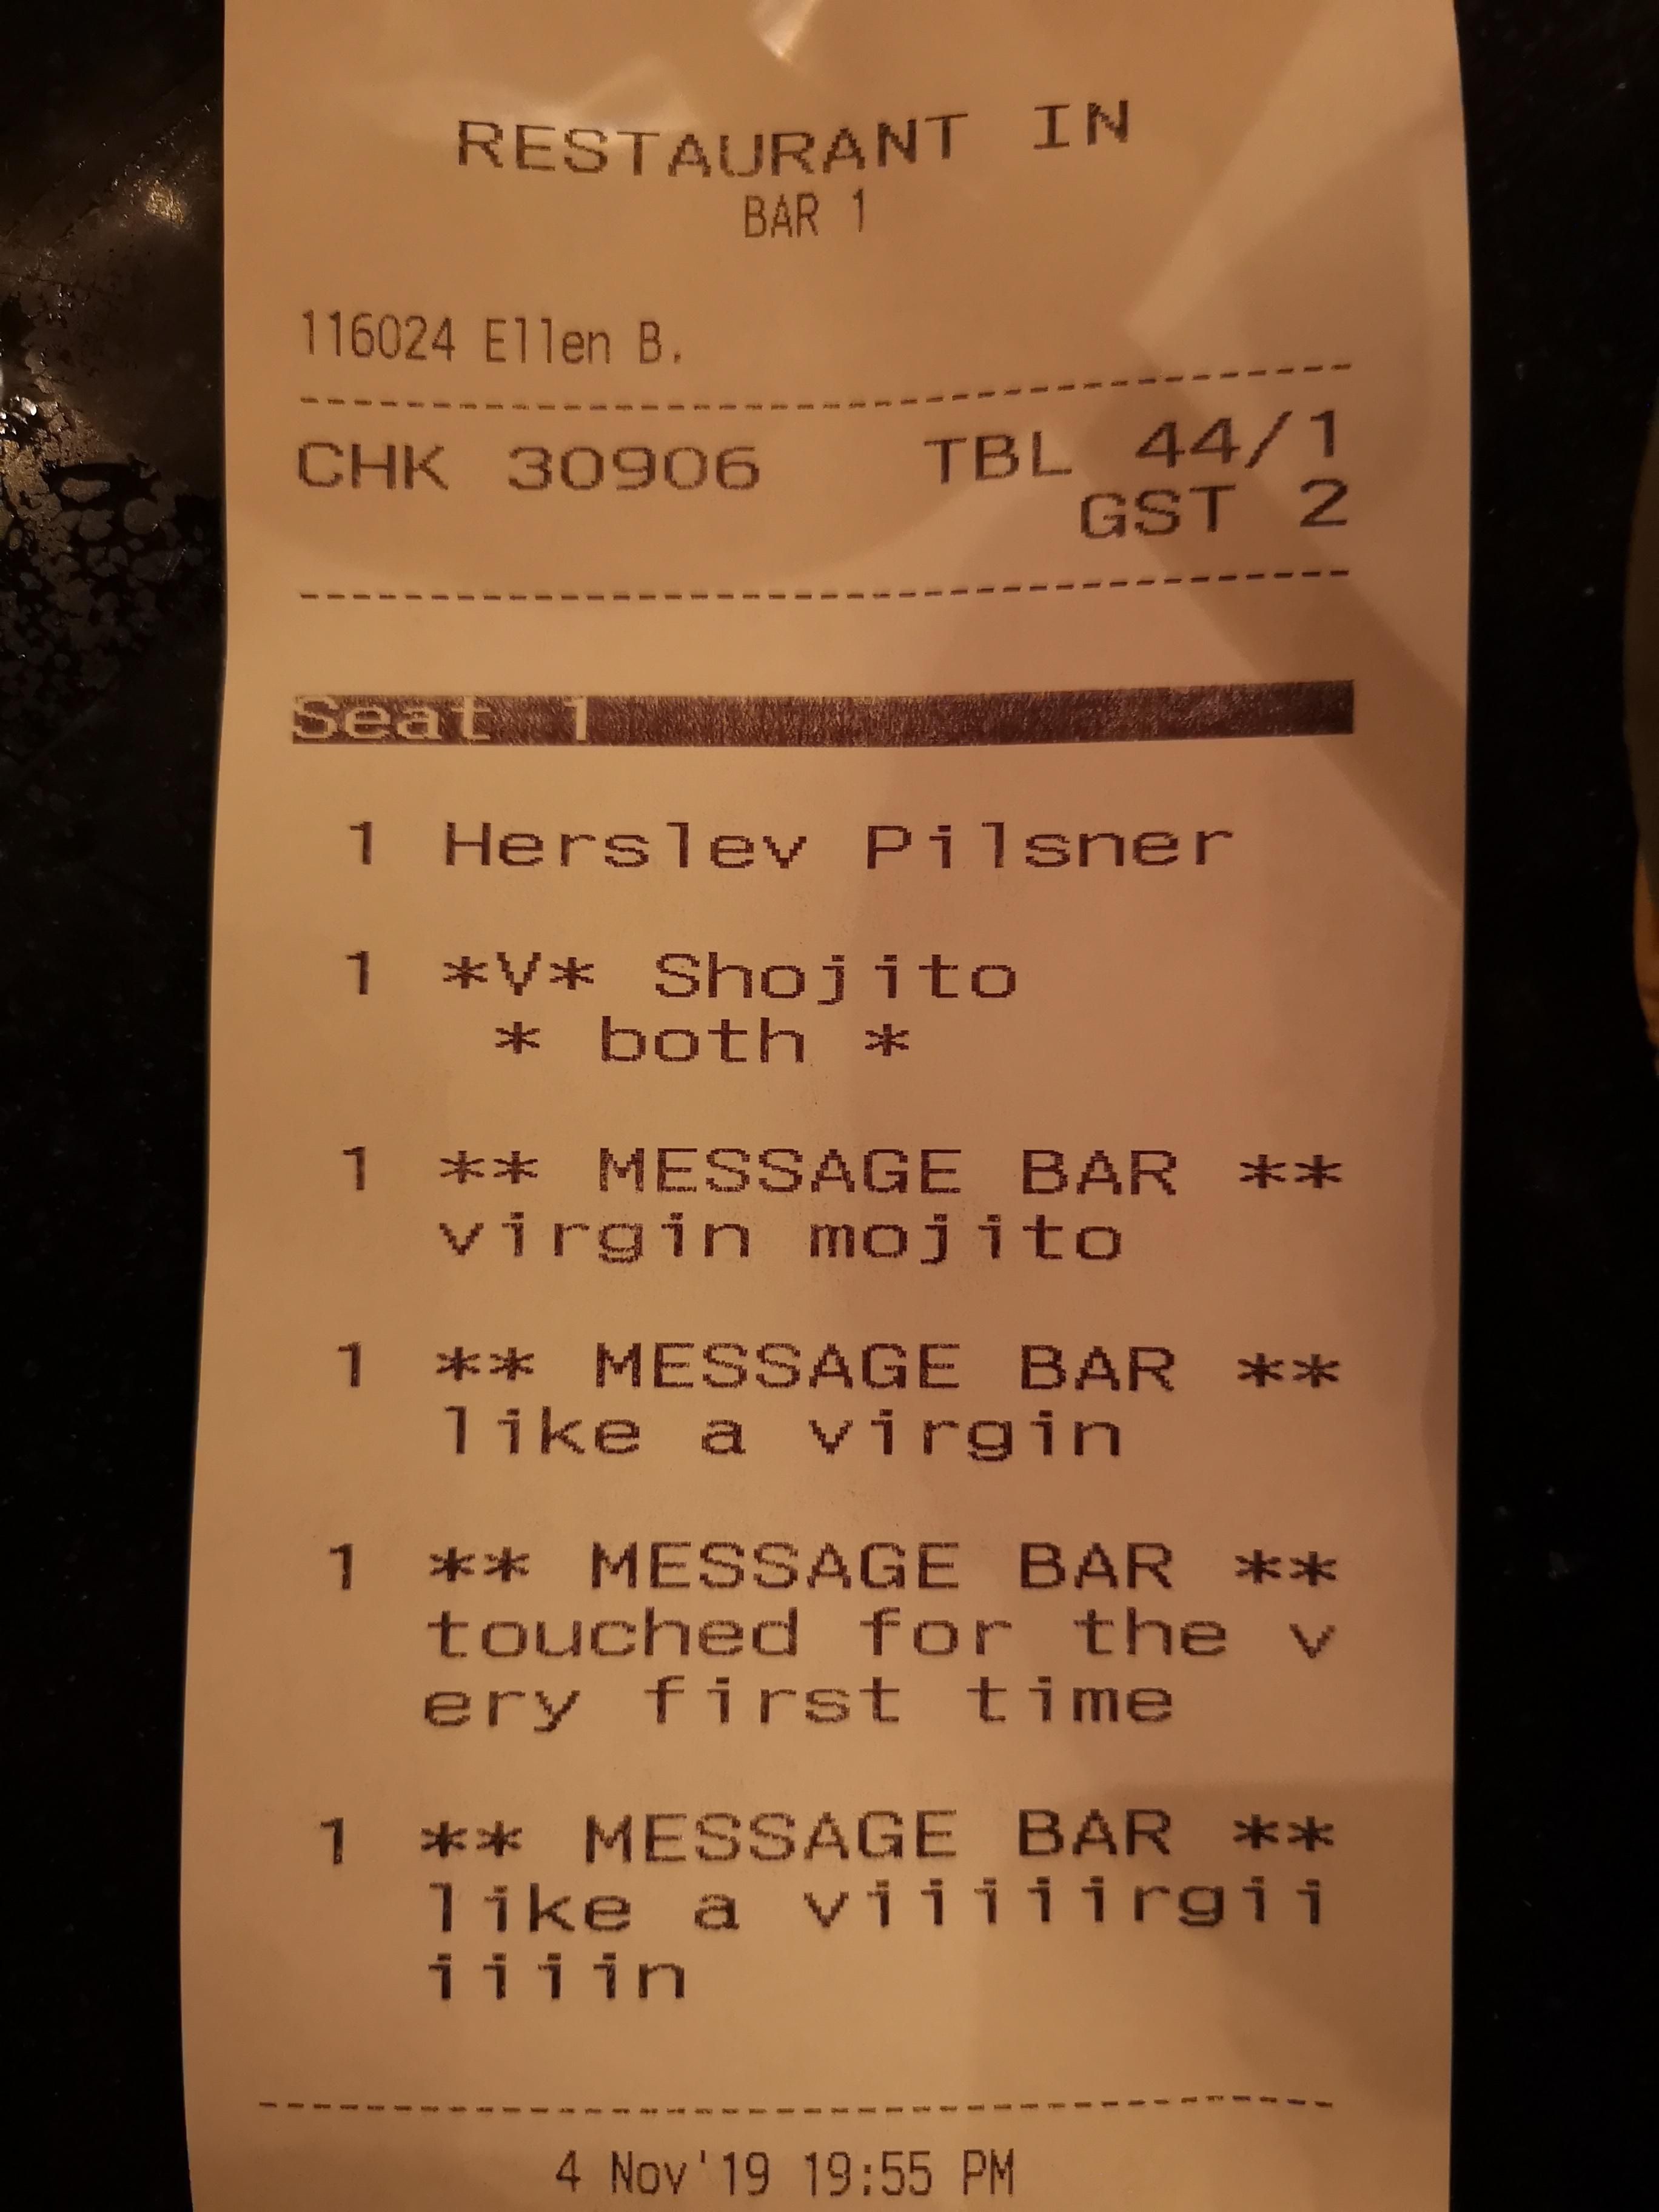 Ordered a virgin mojito at the bar. The bar staff was slightly bored I think.